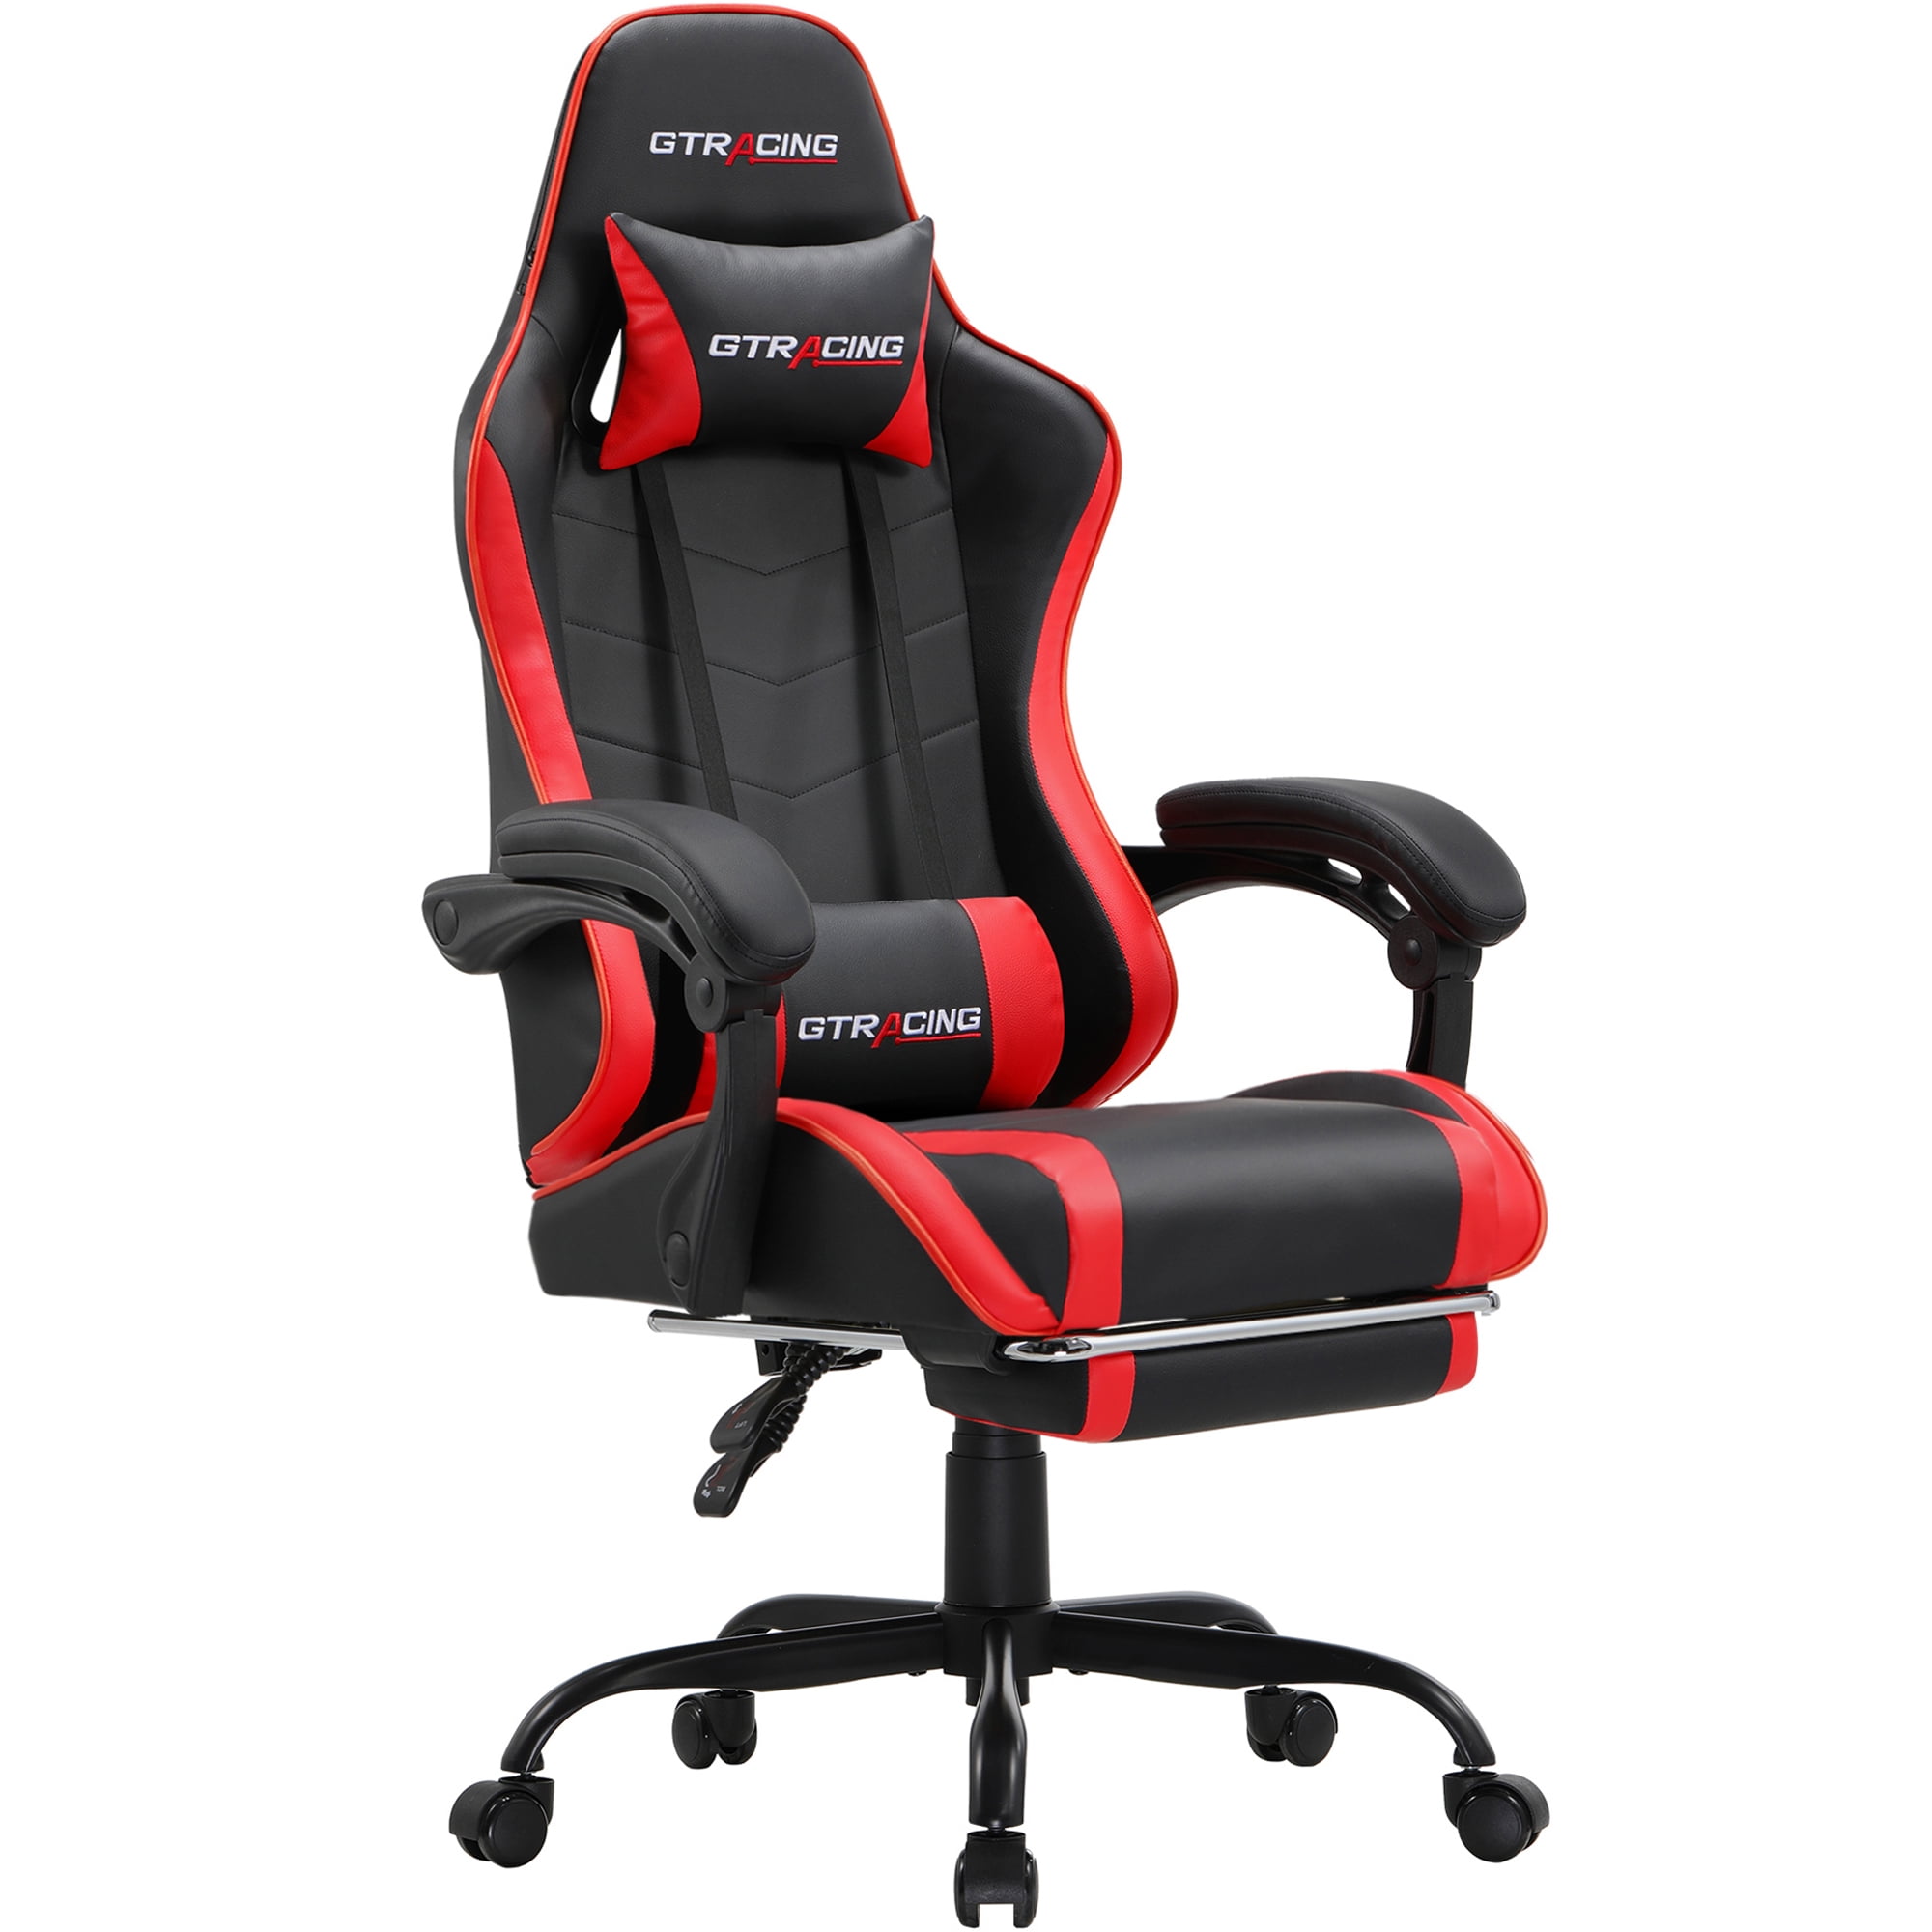 GTRACING GTW-200 Reclining & Adjustable Height Gaming Chair with Footrest, Red